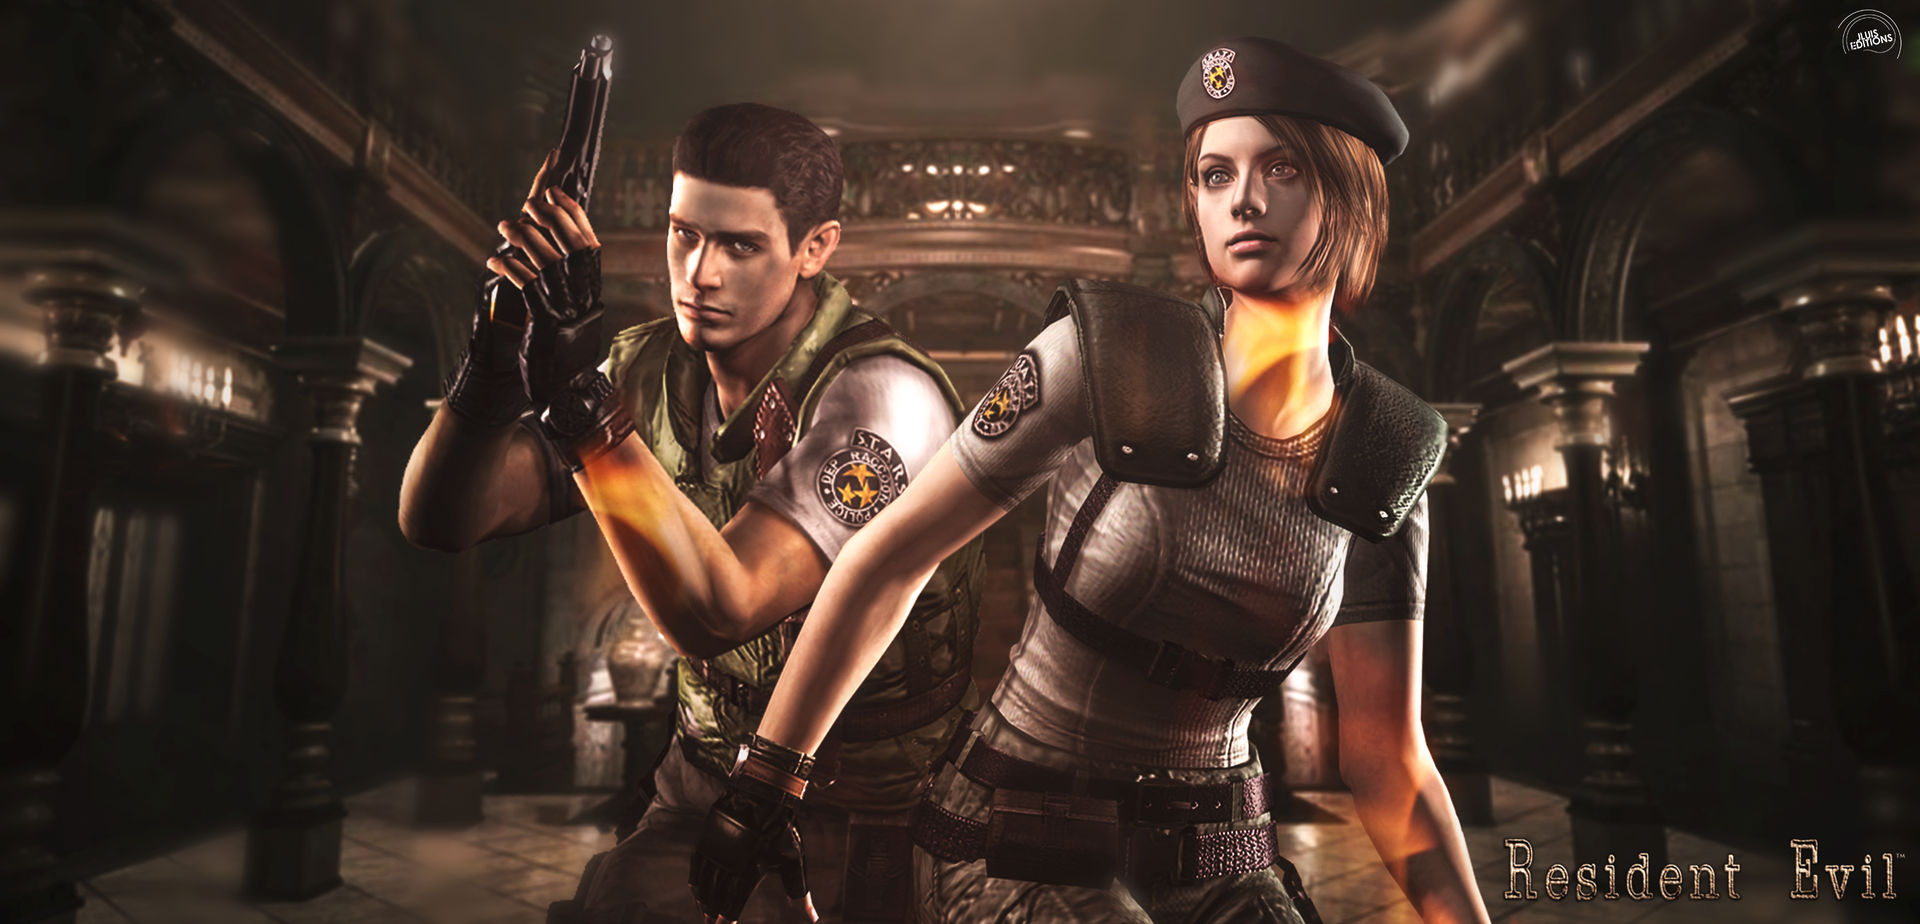 Resident Evil 1 Wallpaper by JeanLuisEditions on DeviantArt